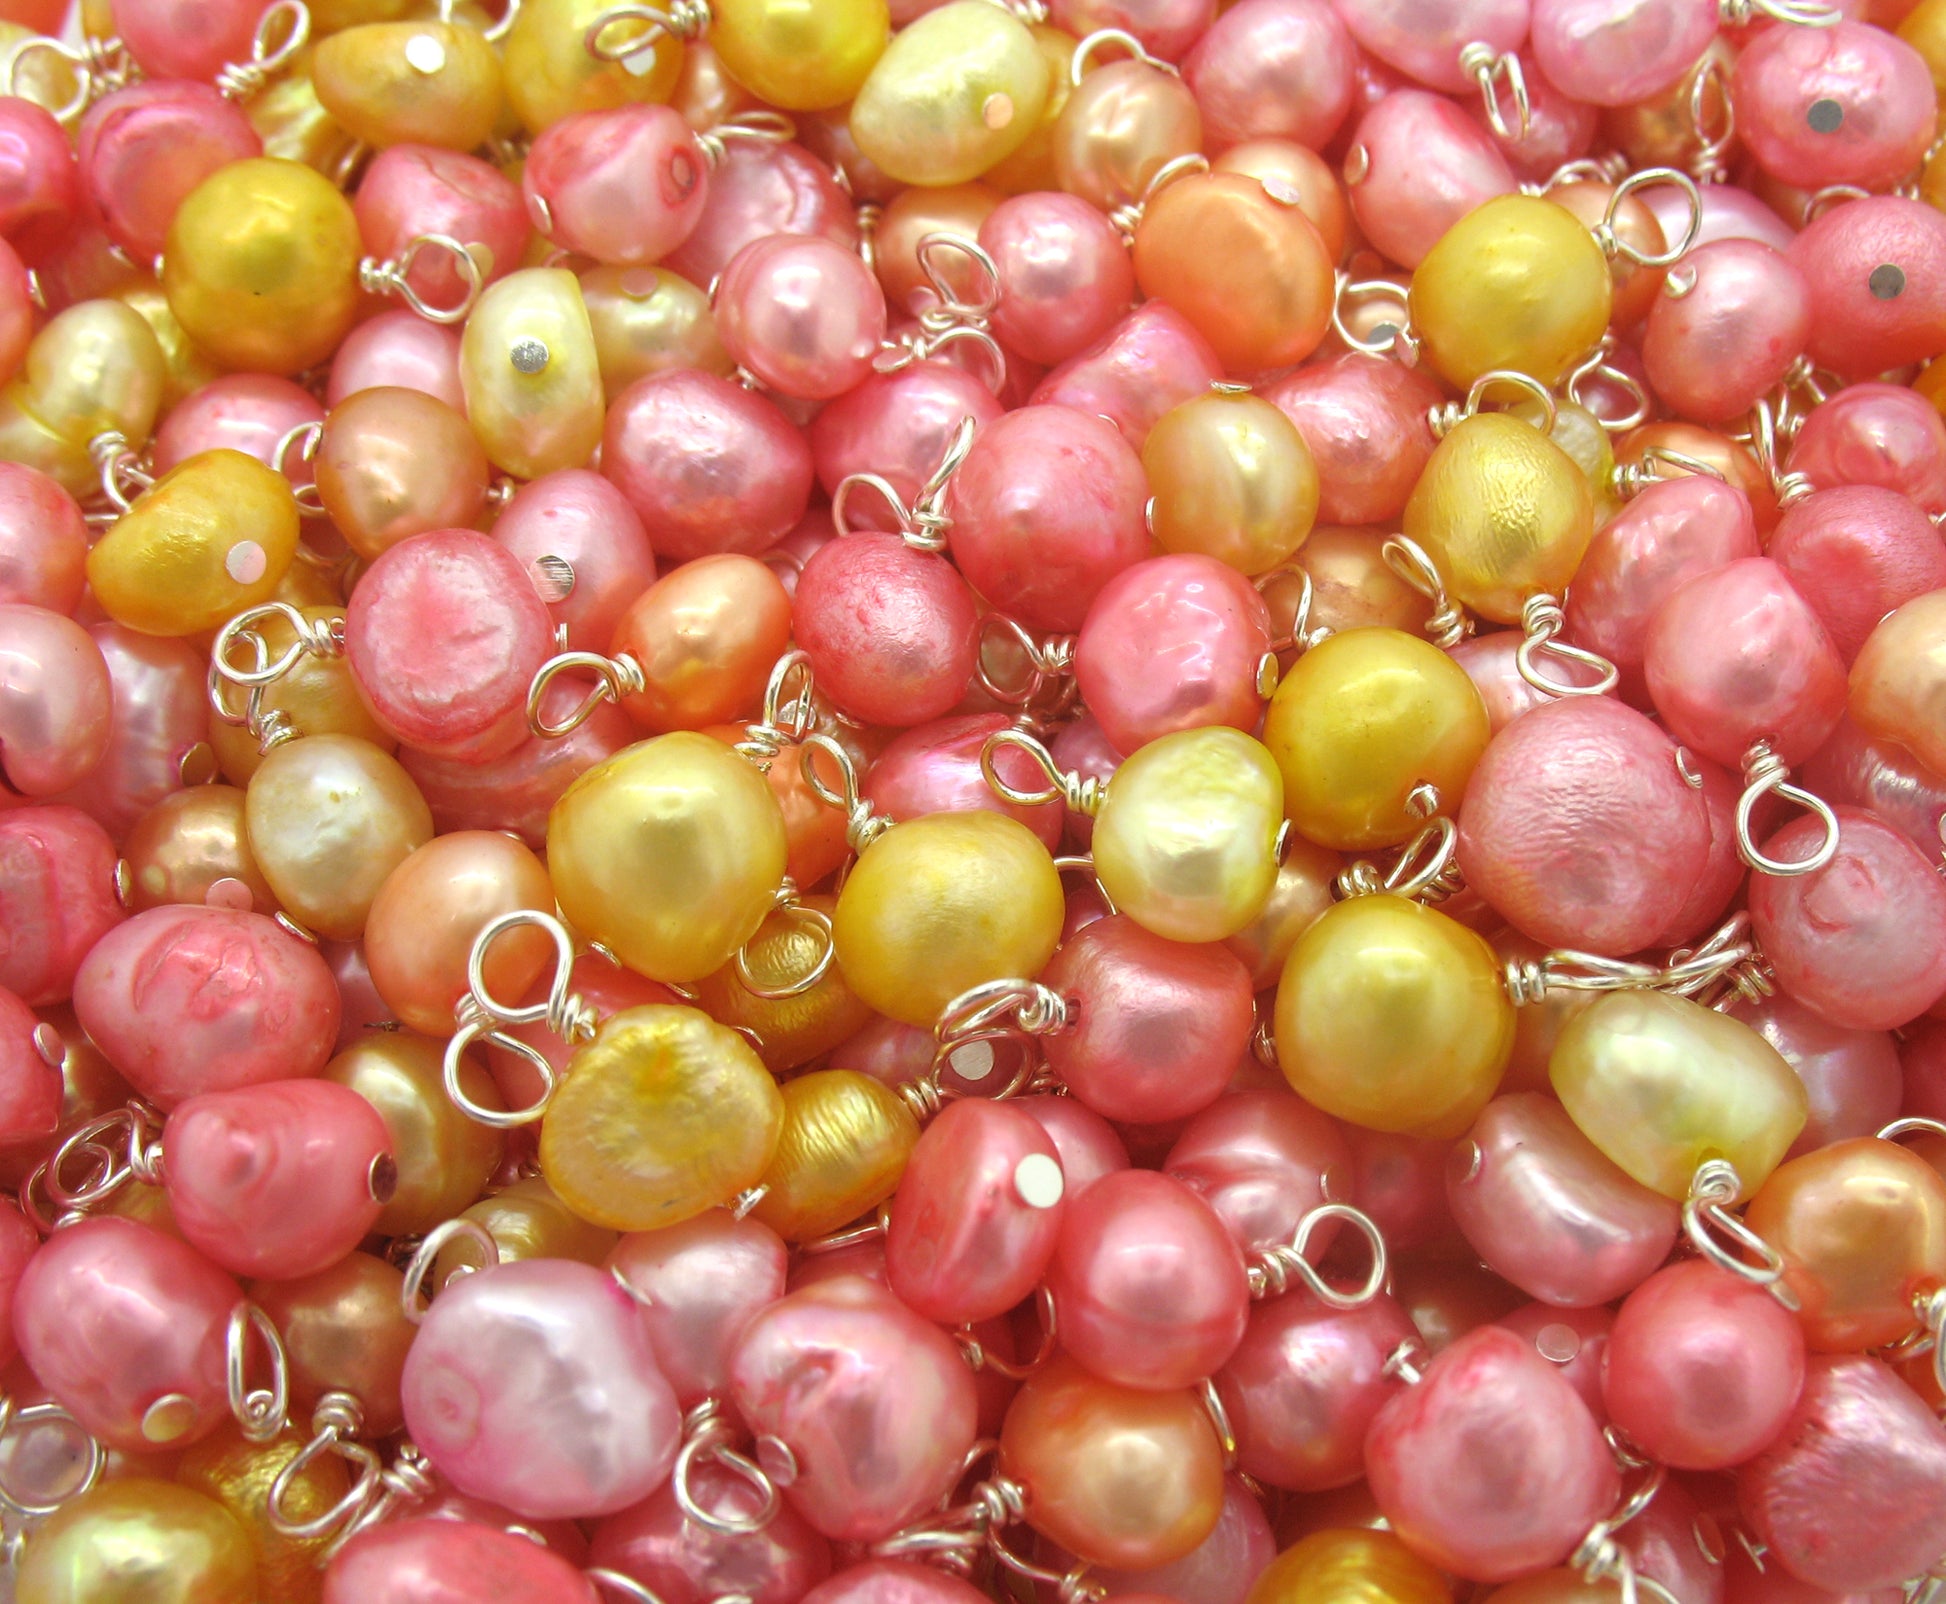 Pearl Charms - Pretty Pink Orange & Yellow Freshwater Pearl Beads - Adorabilities Charms & Trinkets